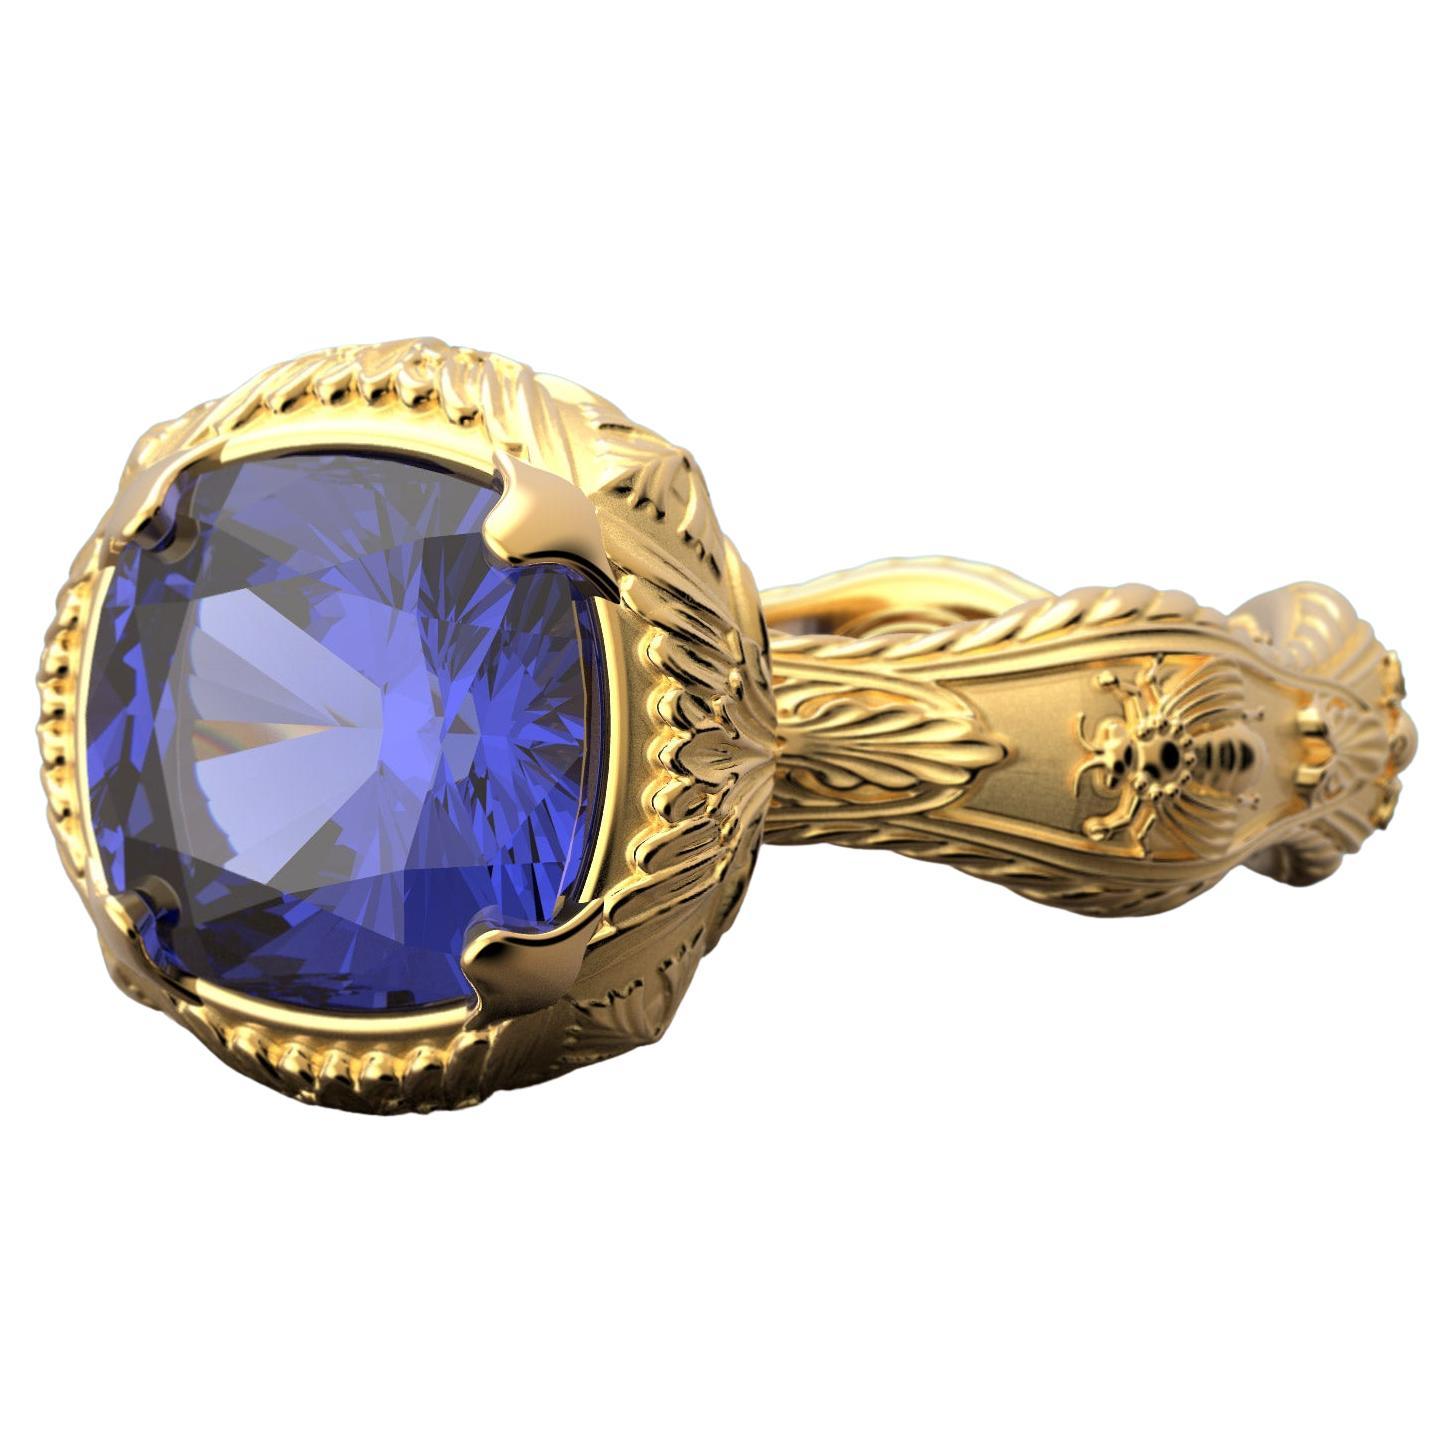 For Sale:  Top Quality Tanzanite Ring in 14k Gold Made in Italy by Oltremare Gioielli